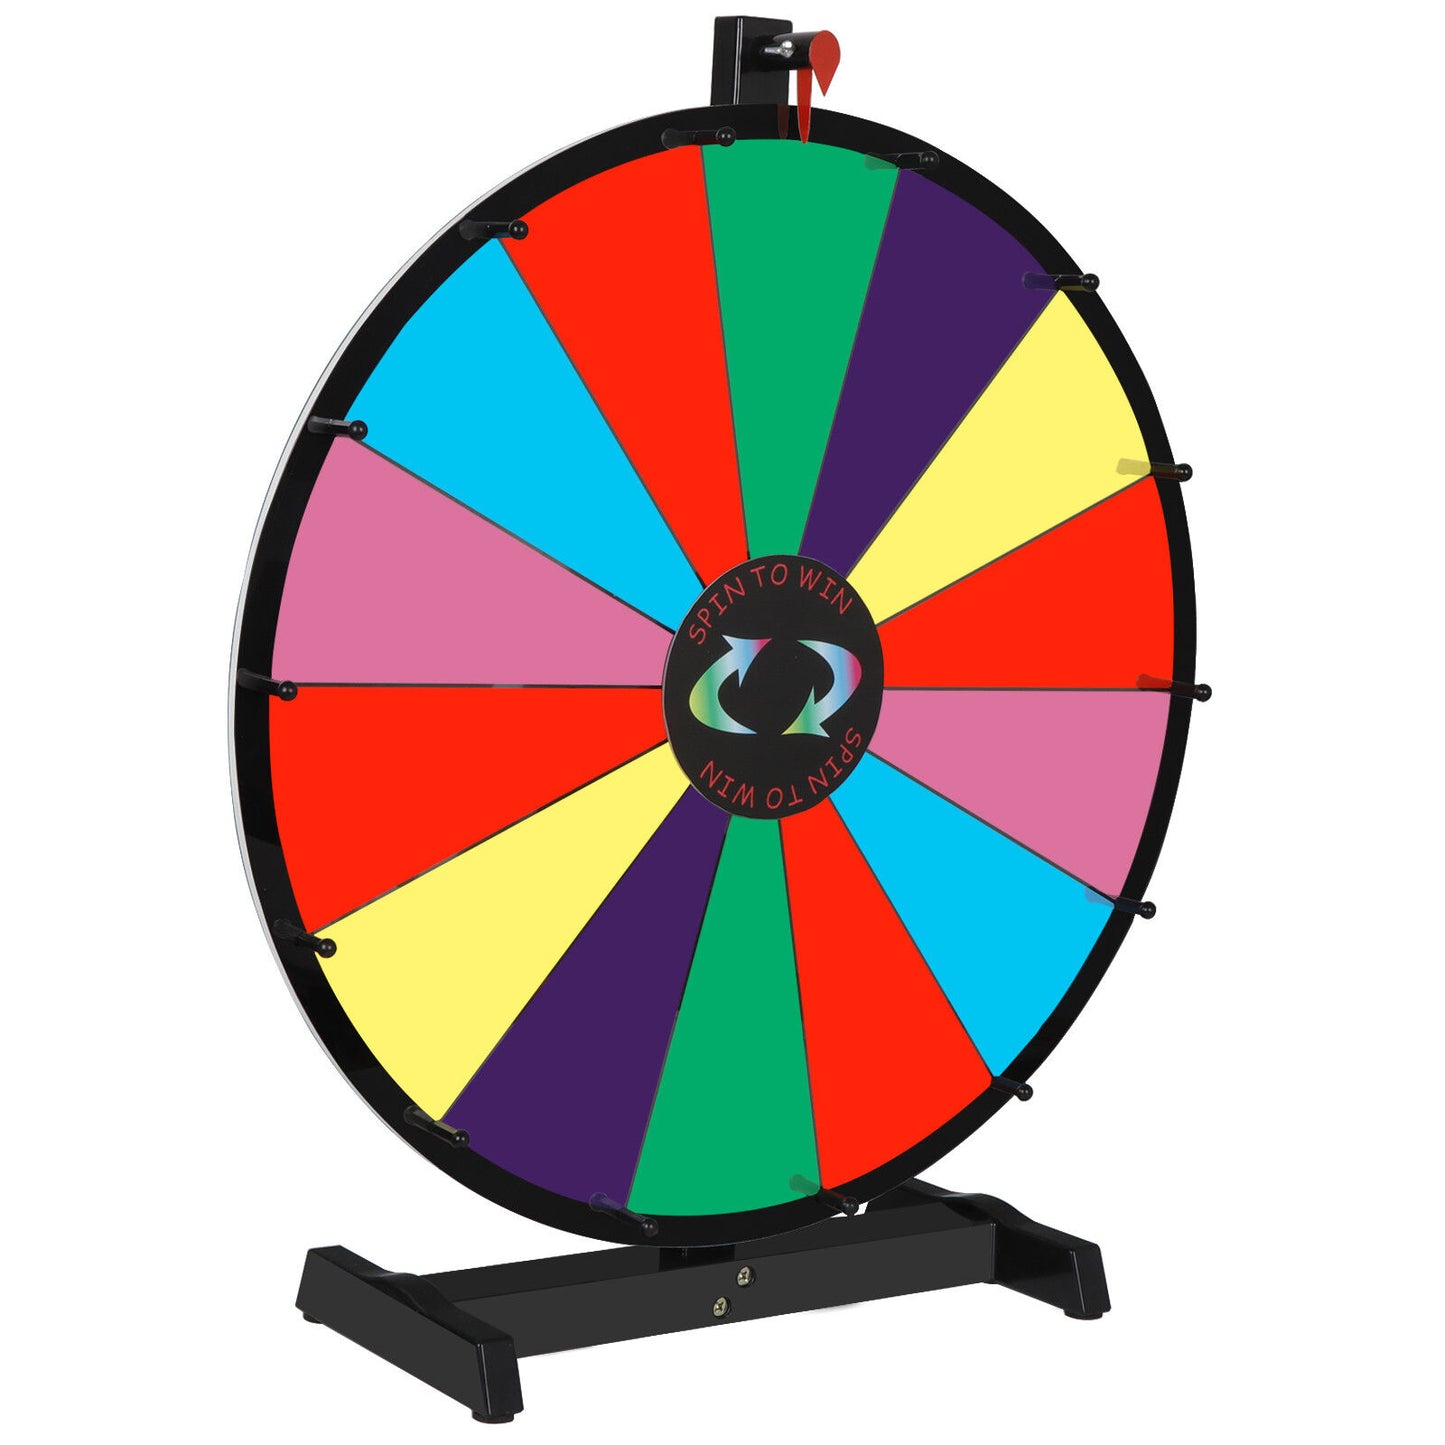 24" Prize Wheel Customizable Color Erasable Board W/Sturdy Stand Tradeshows Game